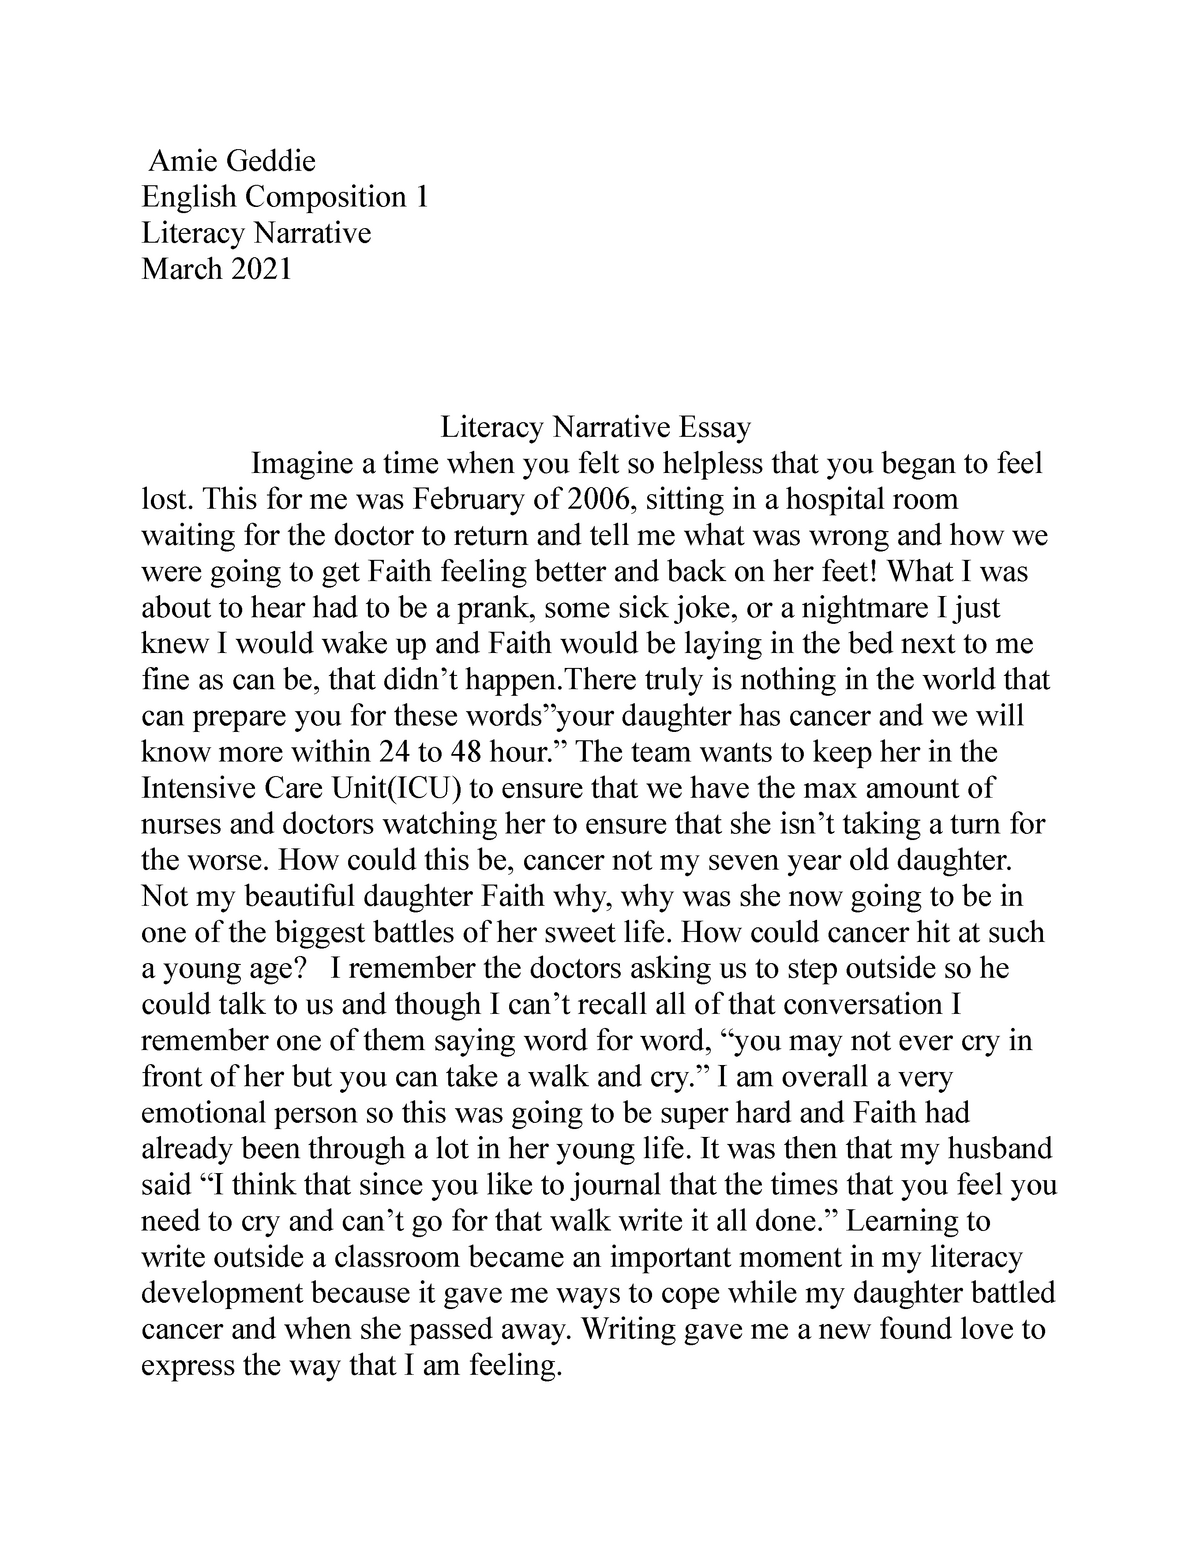 what is literacy narrative essay